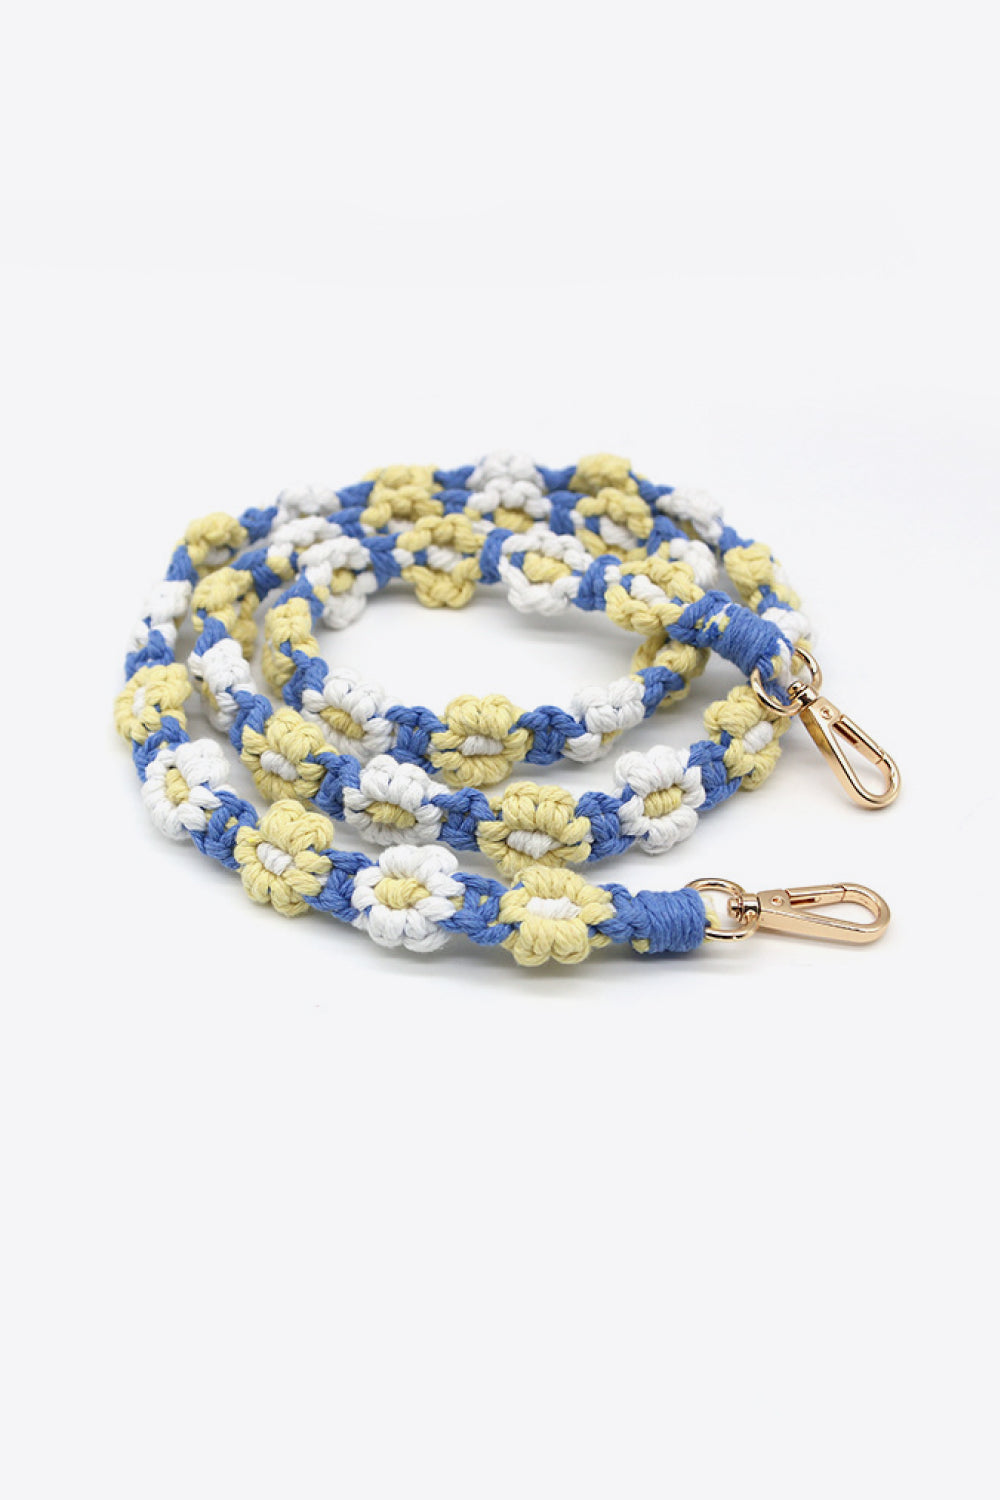 Trendsi Cupid Beauty Supplies Yellow/Blue / One Size Keychains Macrame Flower Lanyard